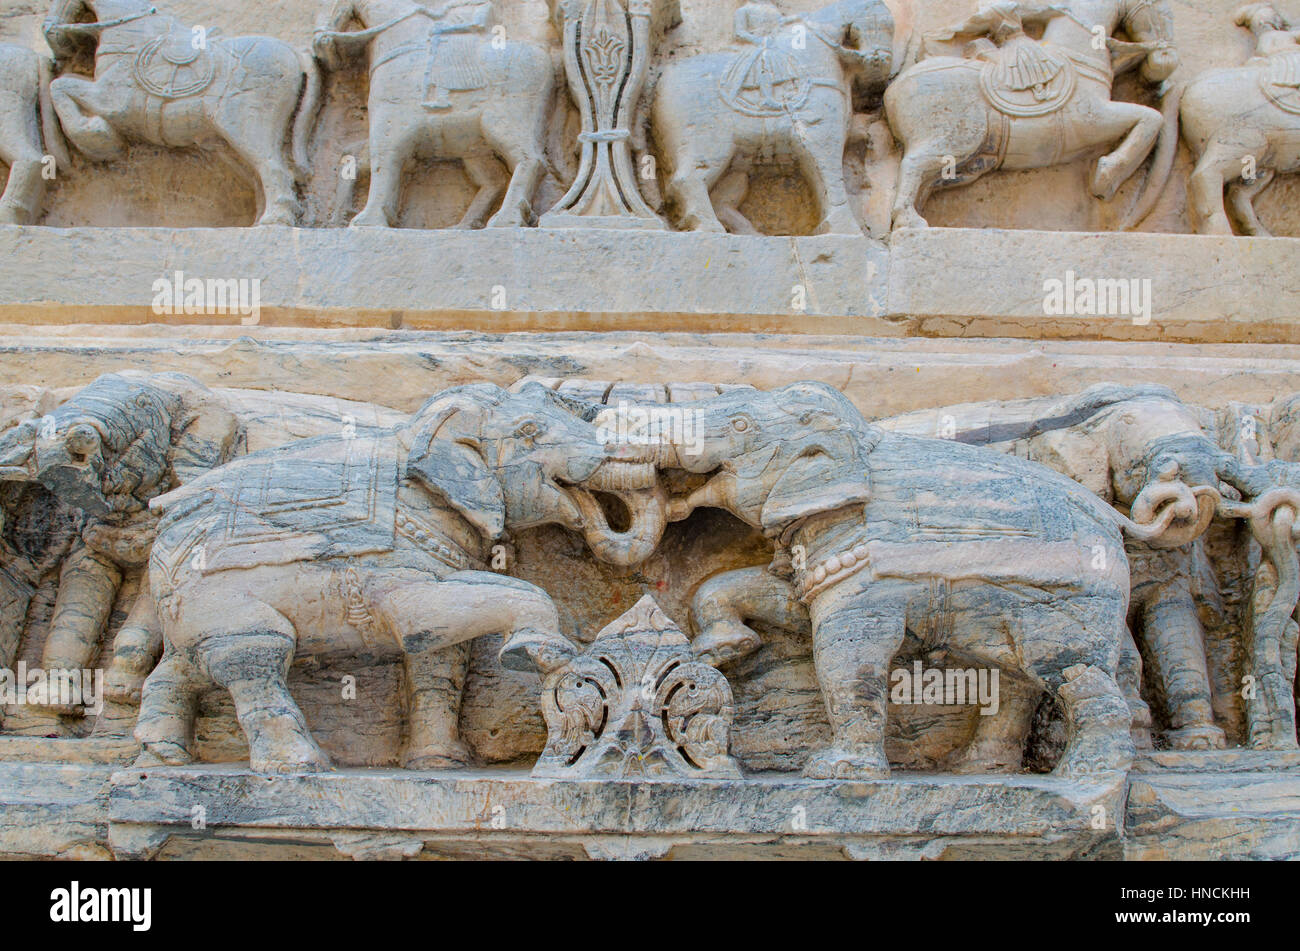 sculptural relief with the image of living beings Stock Photo